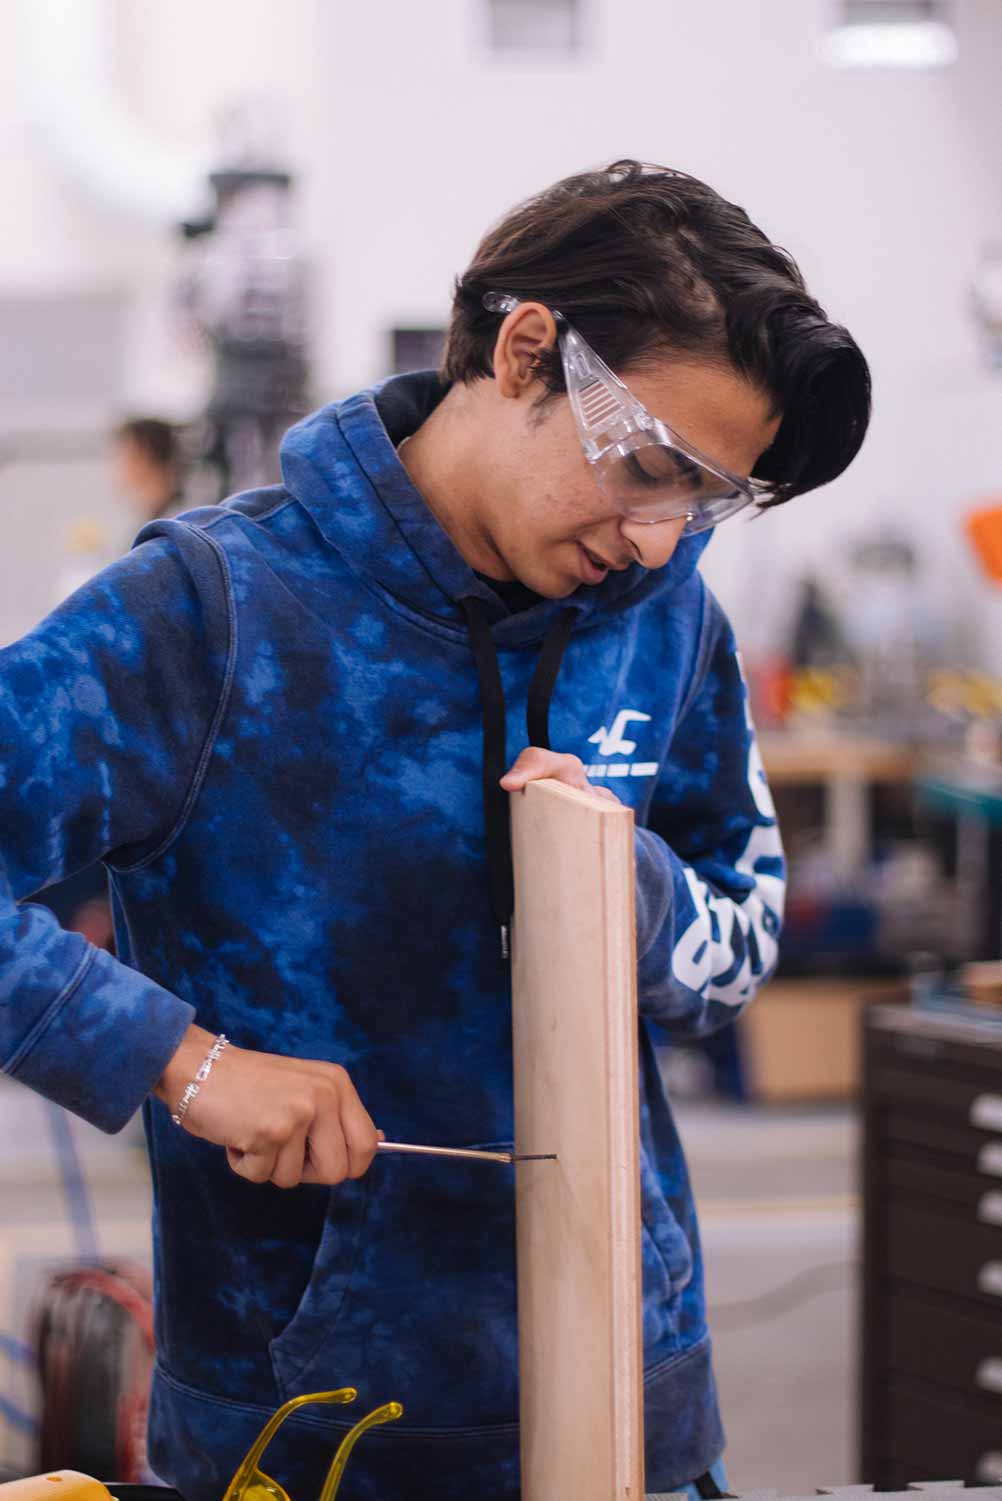 Young male with safety goggles working on project in workshop. Photo by Jeremy Bishop on Unsplash.